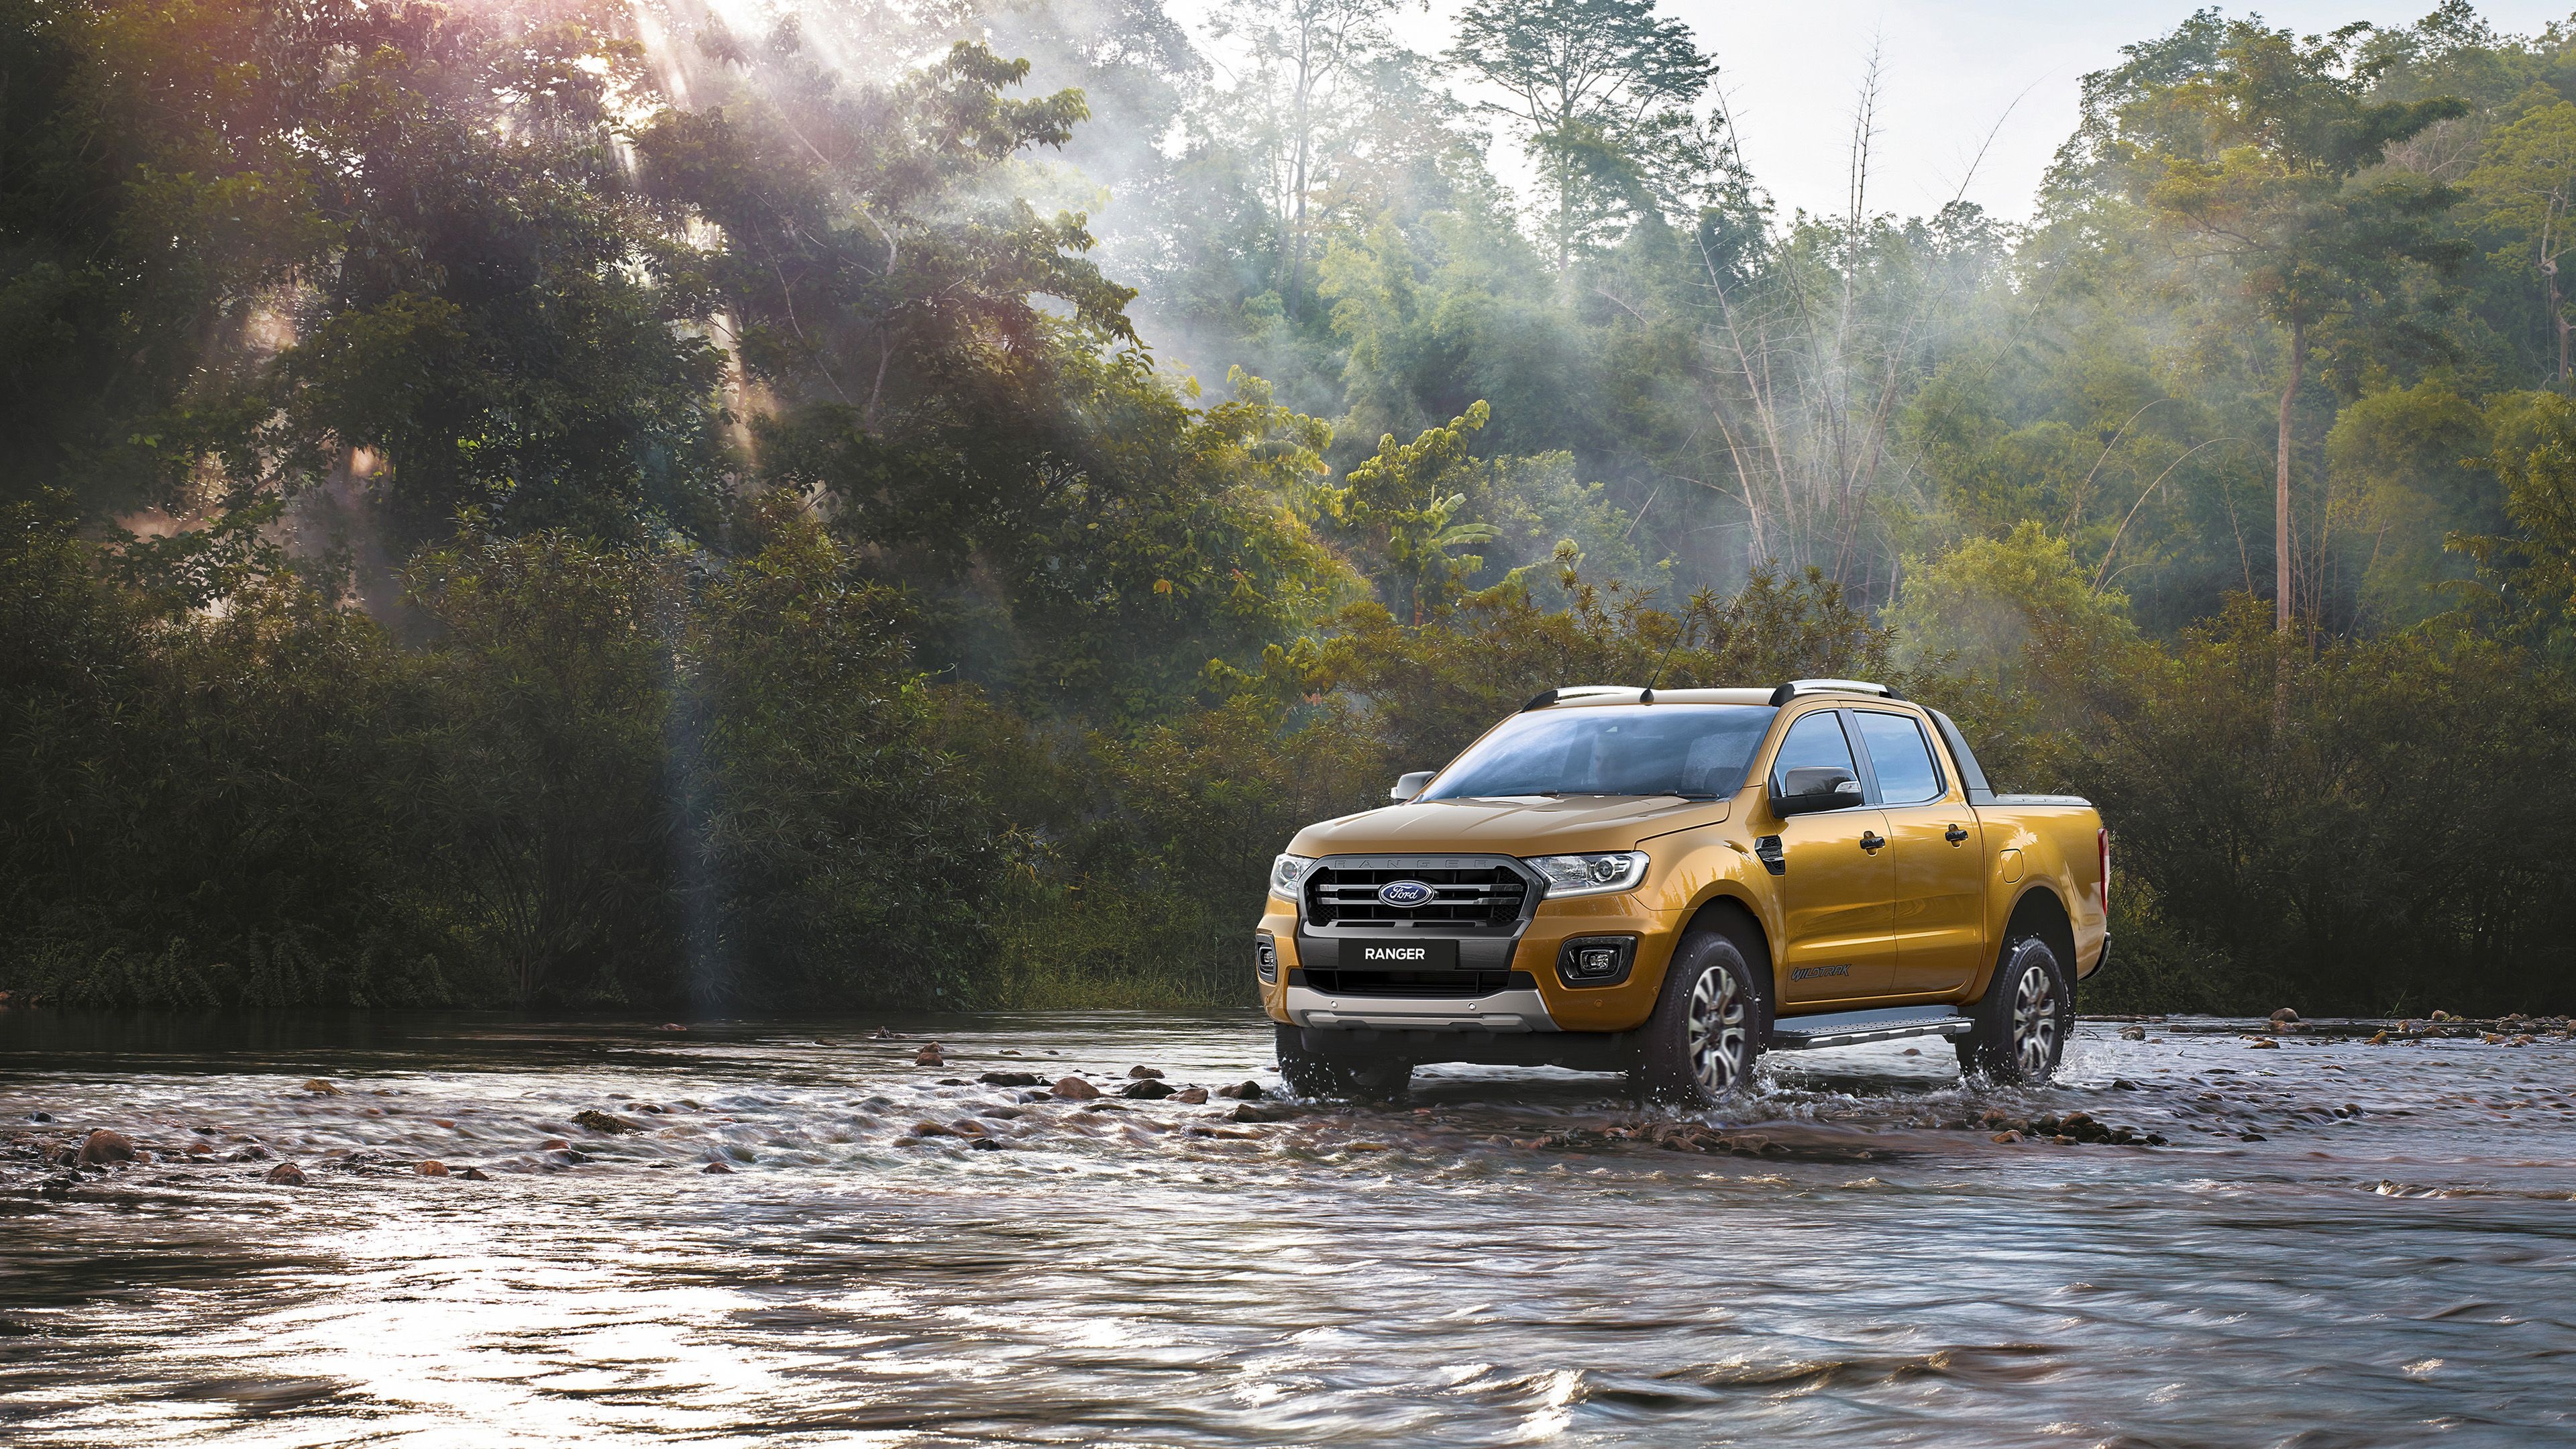 Ford Ranger: A mid-size pickup truck, the model was developed in-house by Australian branch. 3840x2160 4K Wallpaper.